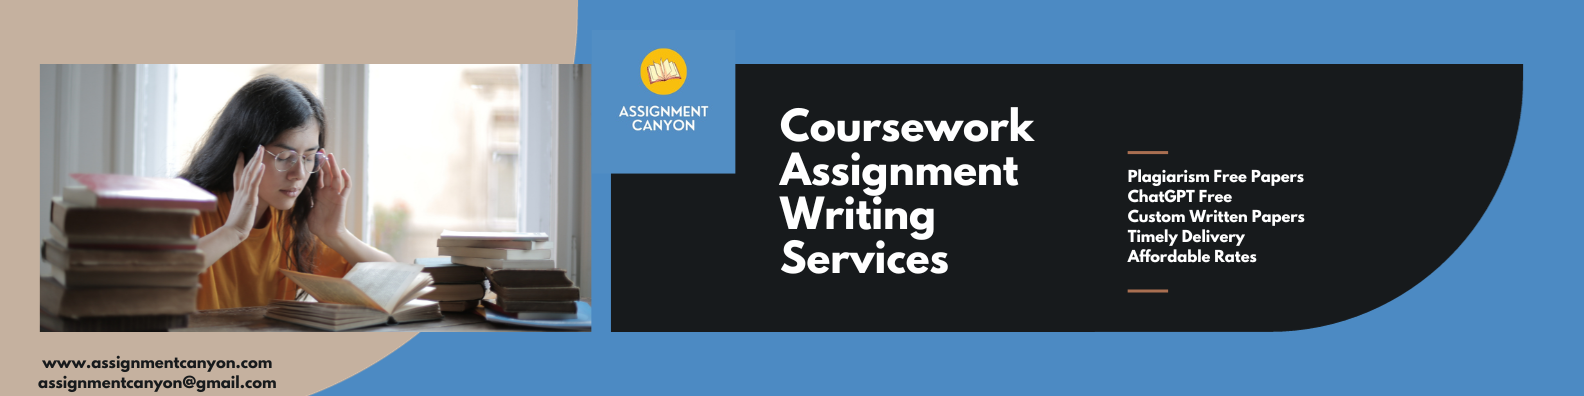 Get professional Coursework Writing Services from professionals